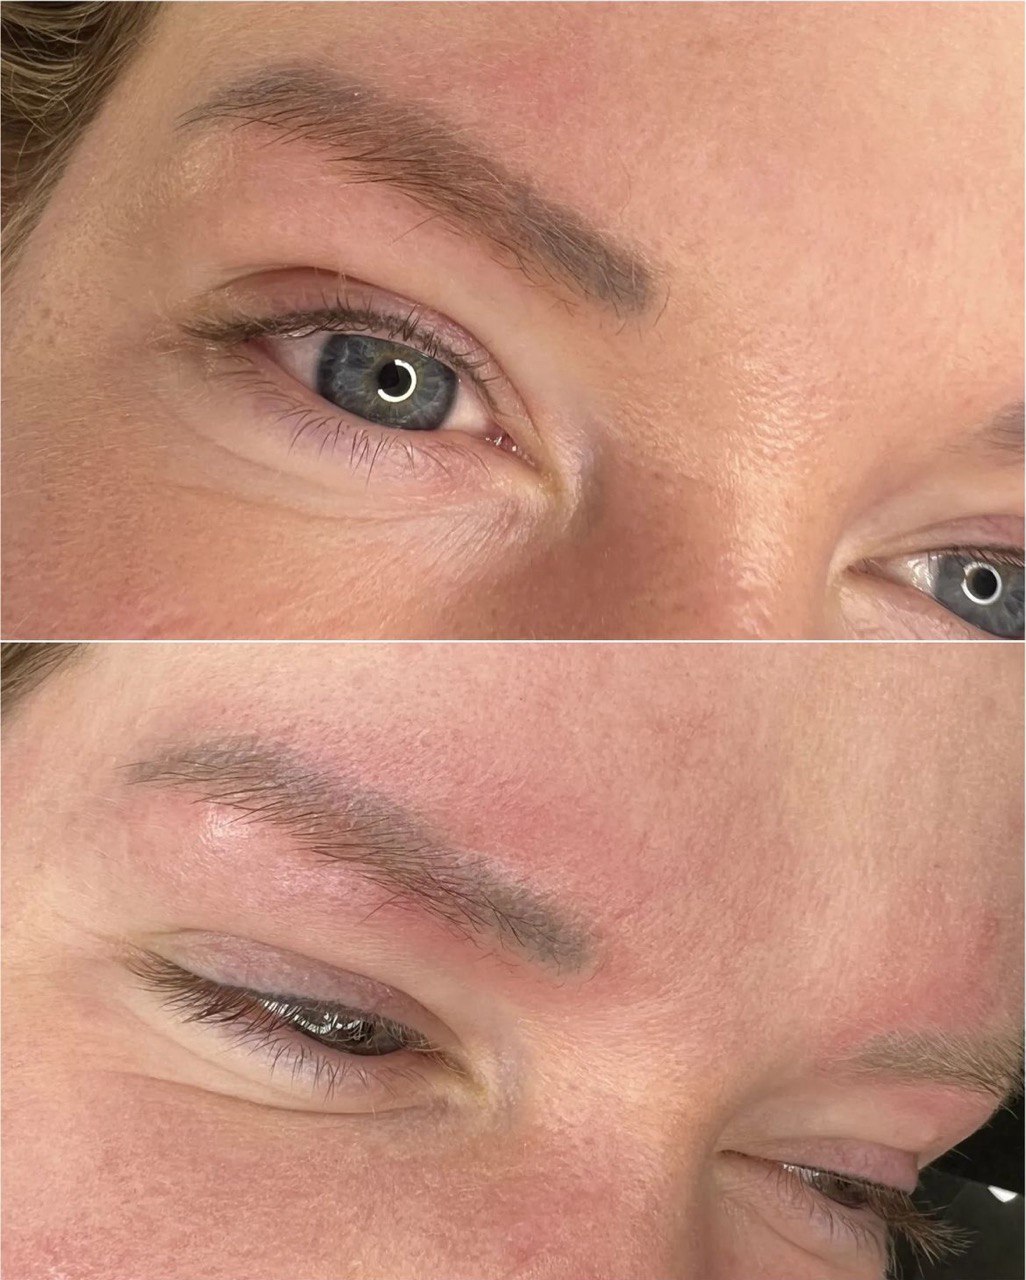 Nd:Yag Laser Tattoo Removal. Cosmetic and Mediical Tattoo by Dasha. Permanent makeup and reconstructive tattoo, scalp micro-pigmentation in Christchurch, New Zealand